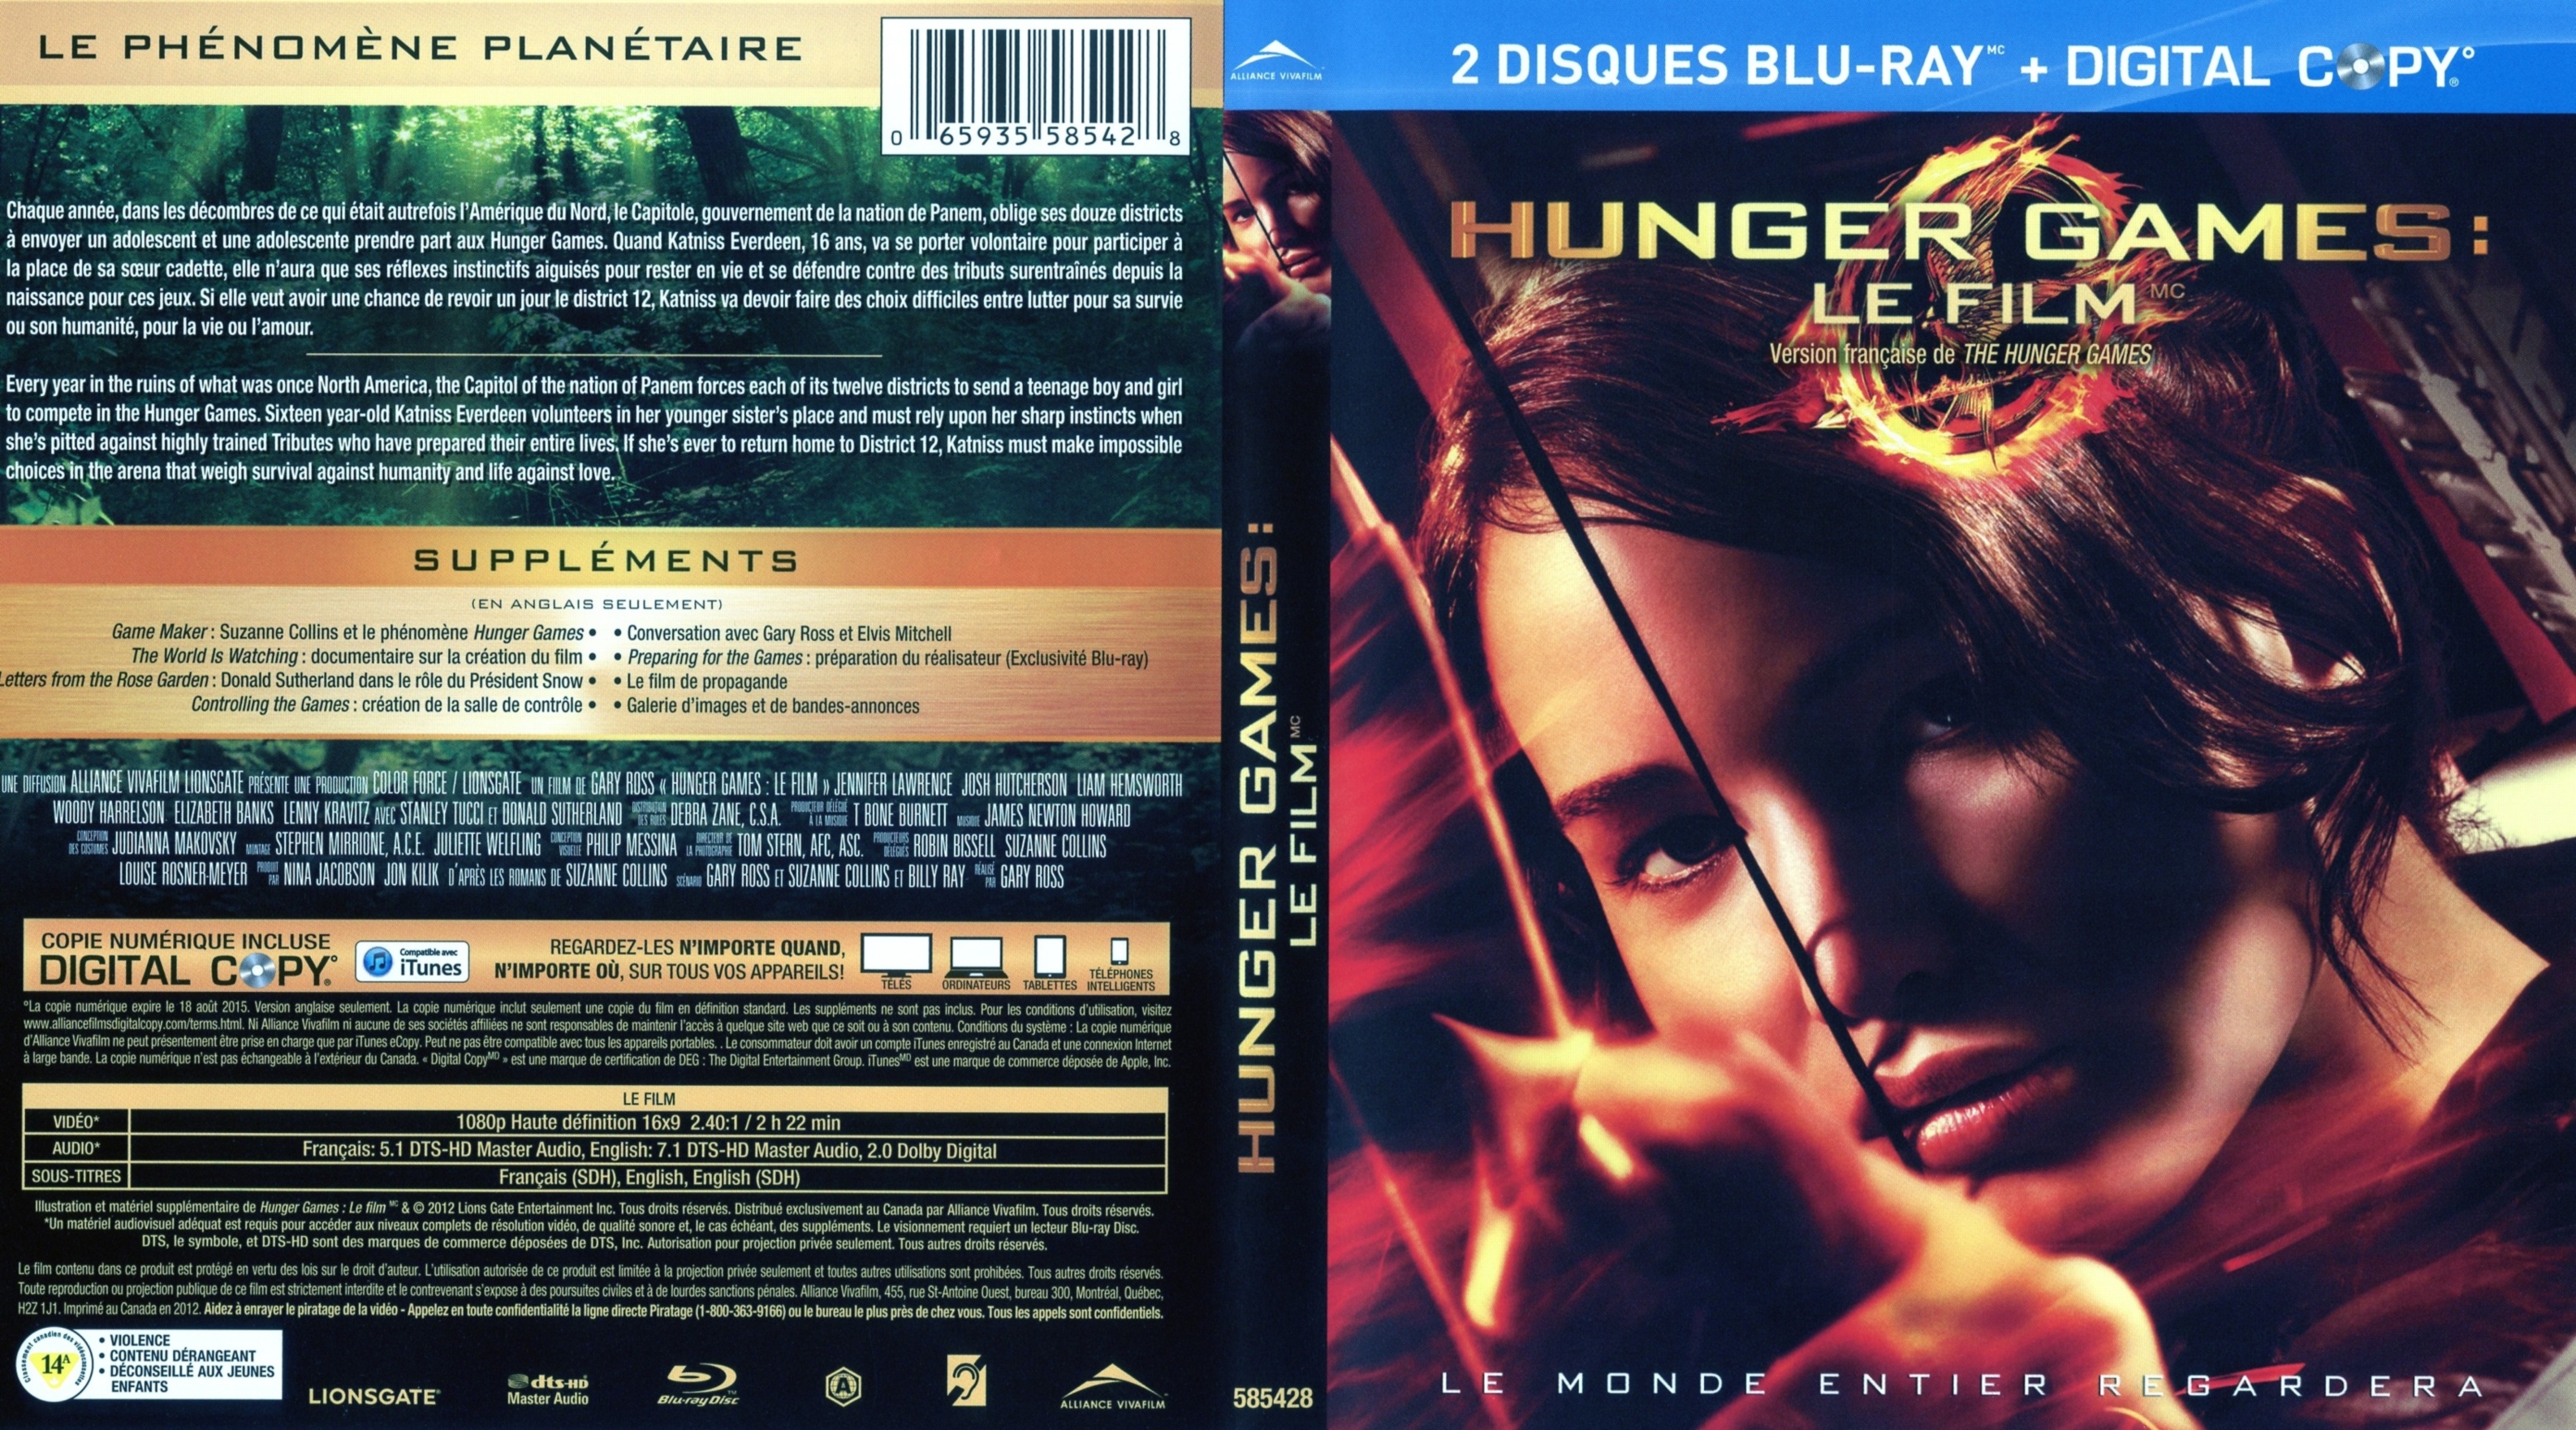 Jaquette DVD The Hunger Games (Canadienne) (BLU-RAY)